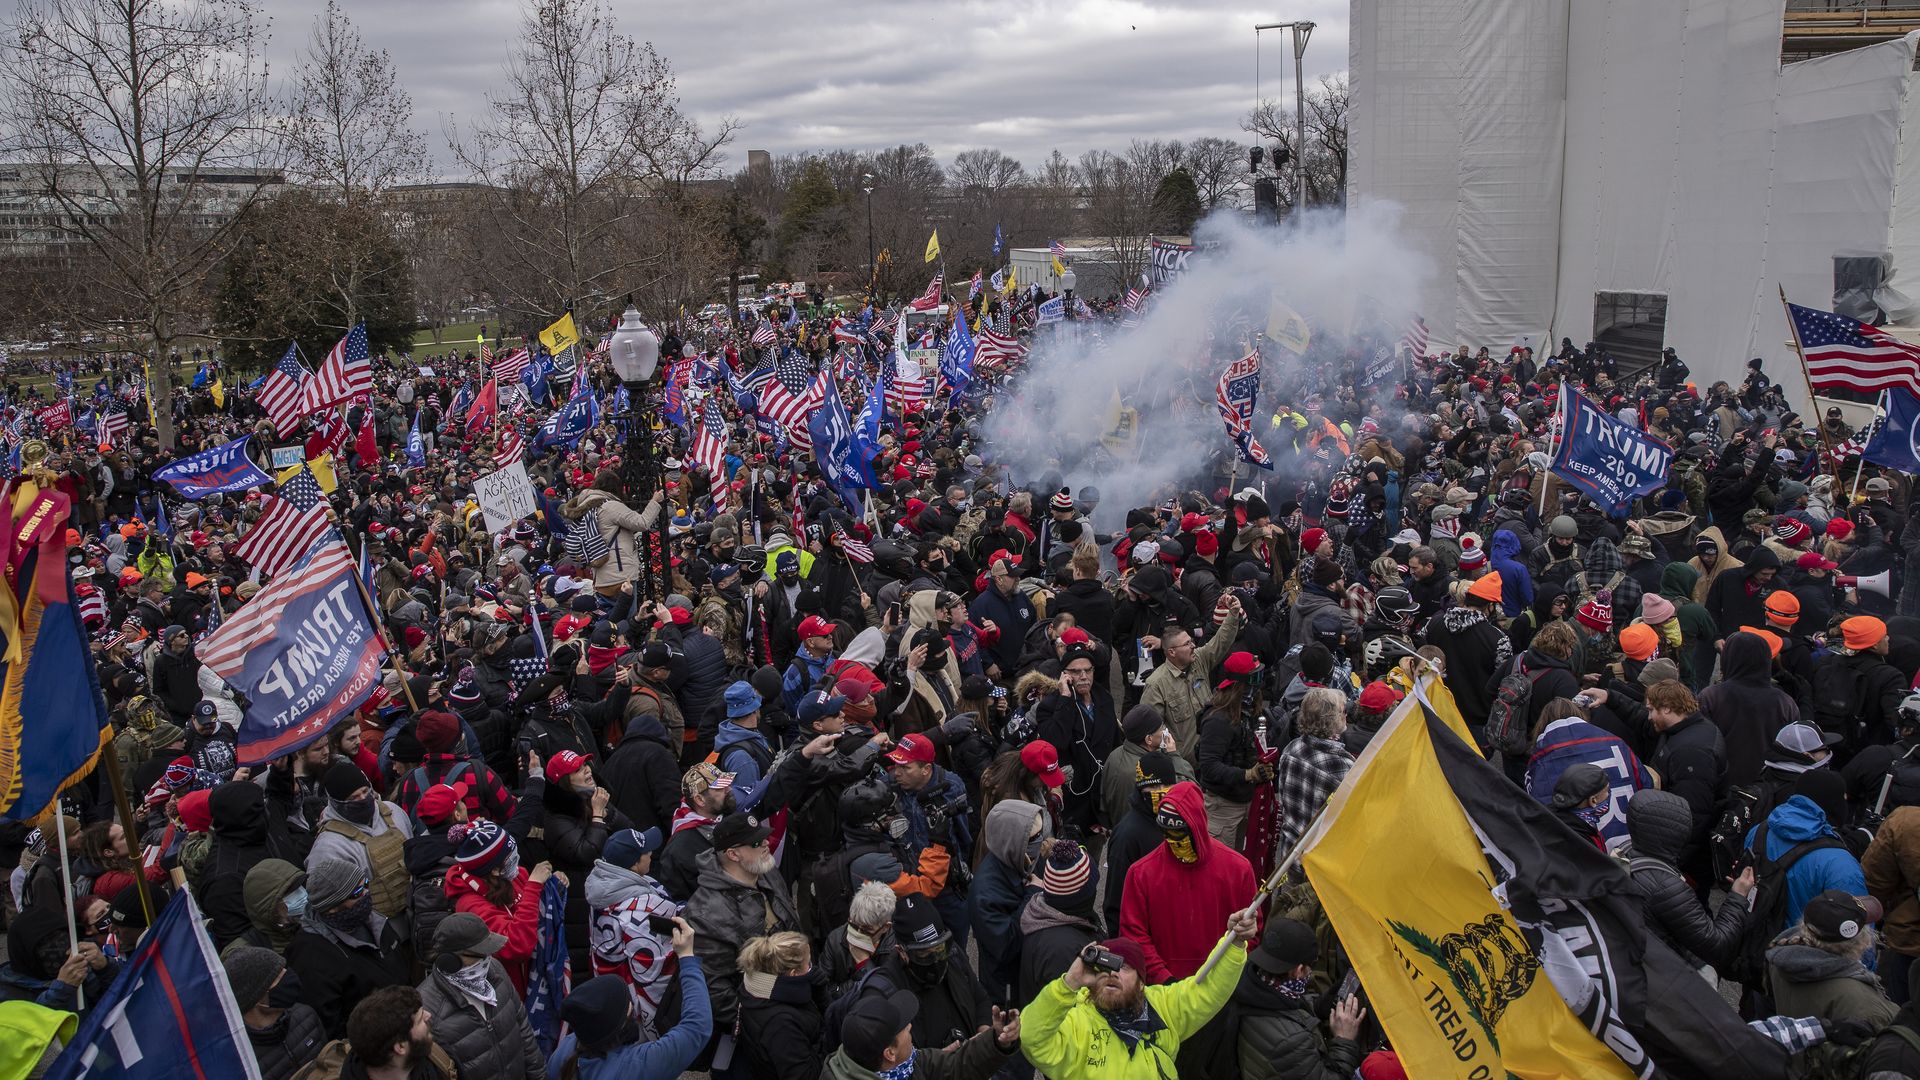 Demonstrators swarm the U.S. Capitol building during a protest in Washington, D.C.